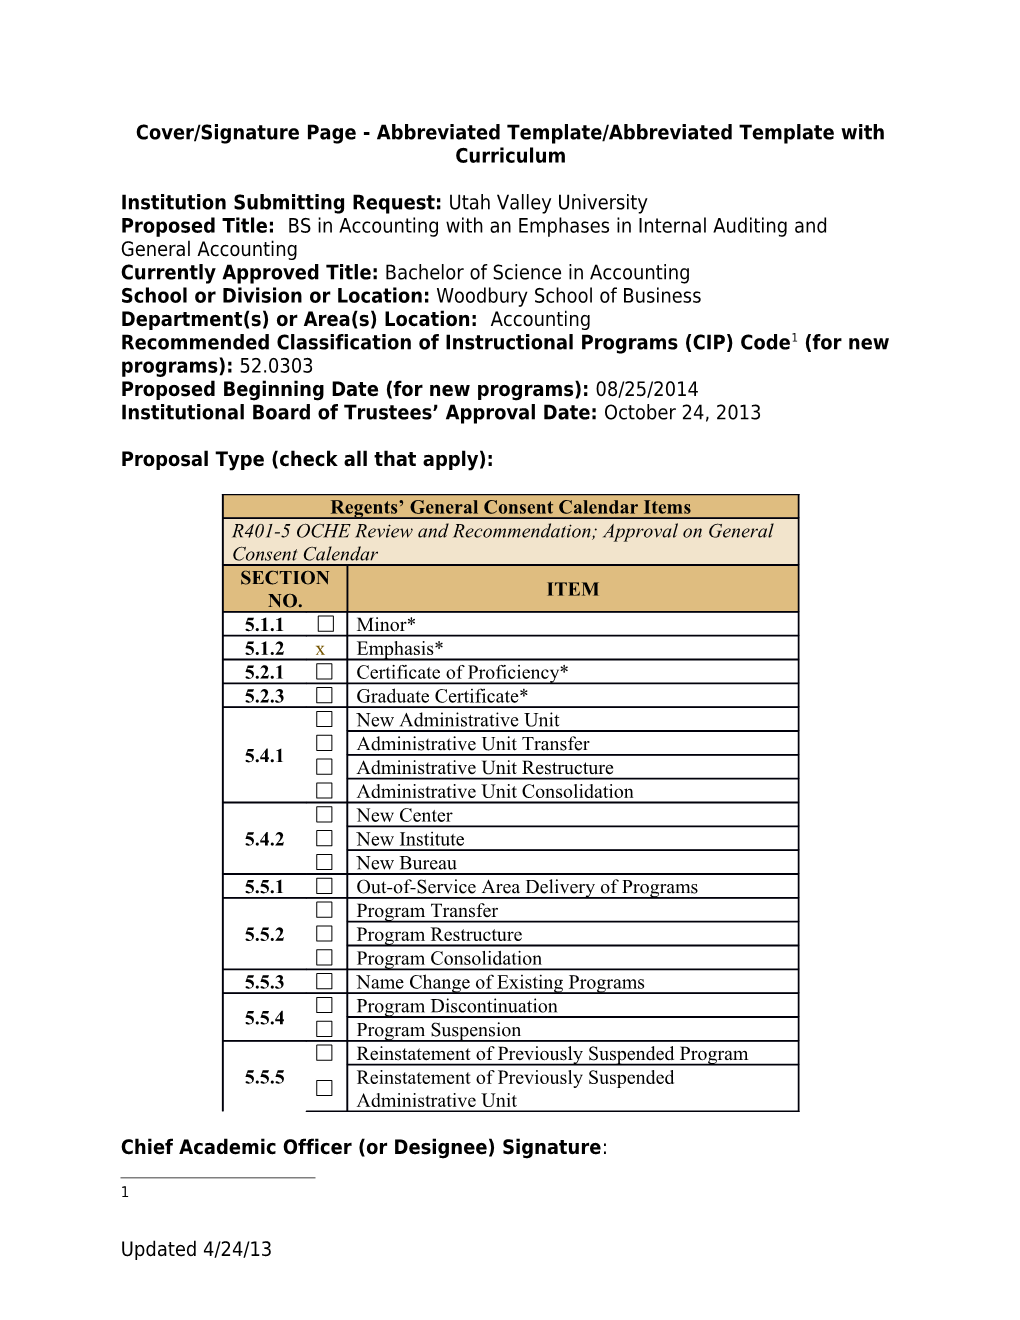 Cover/Signature Page - Abbreviated Template/Abbreviated Template with Curriculum